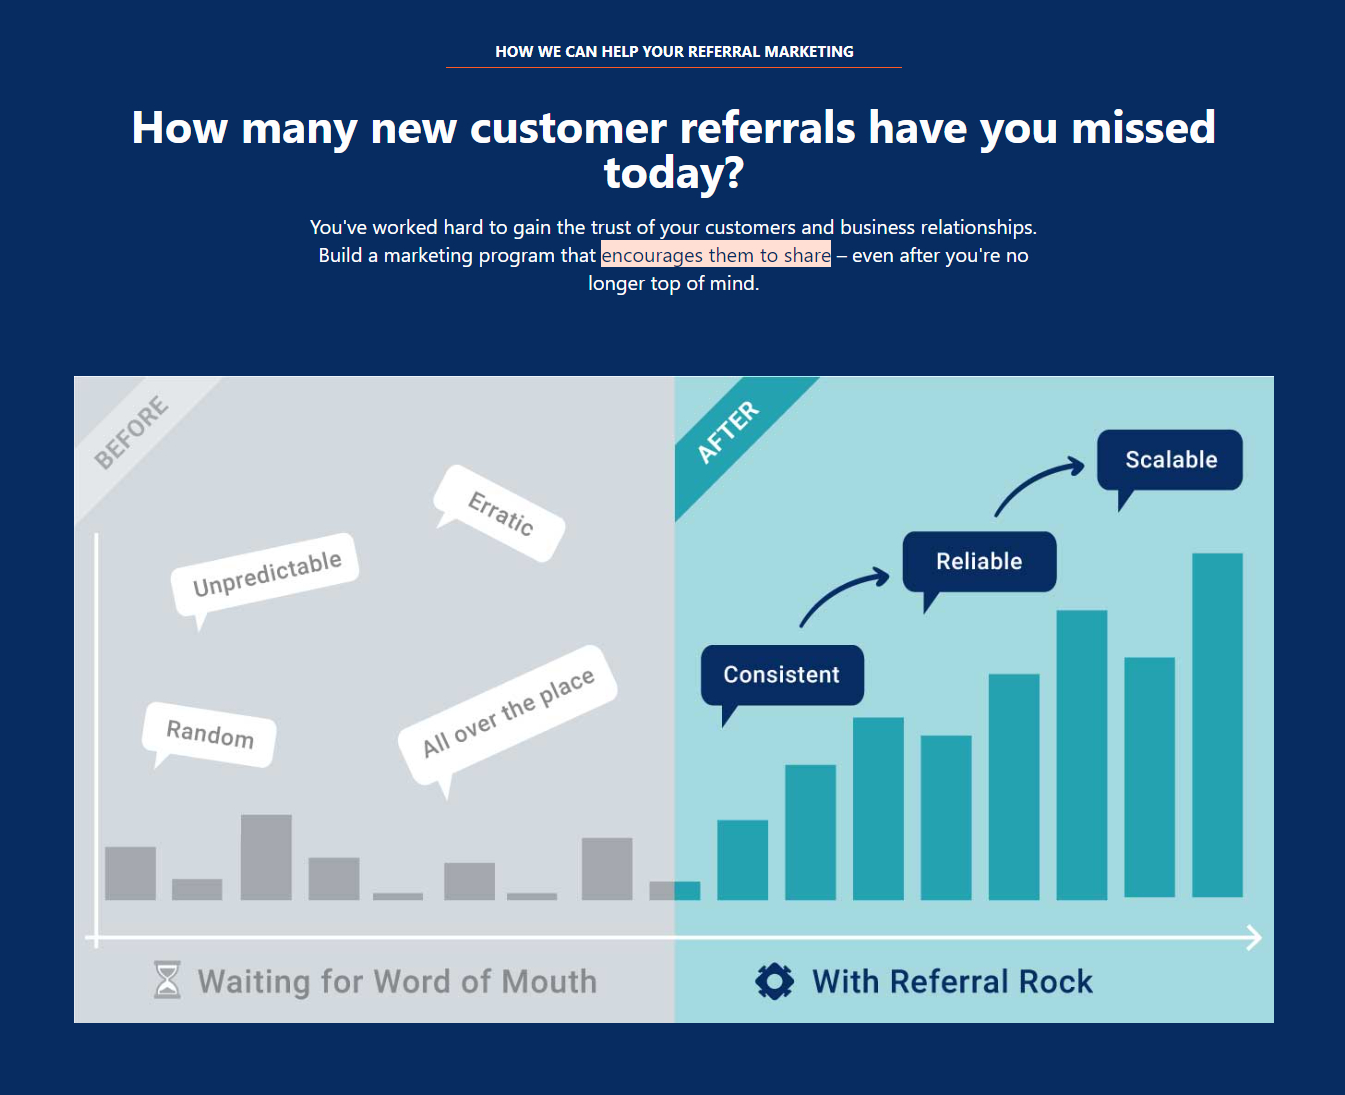 Referral Rock website: How many new customer referrals have you missed today